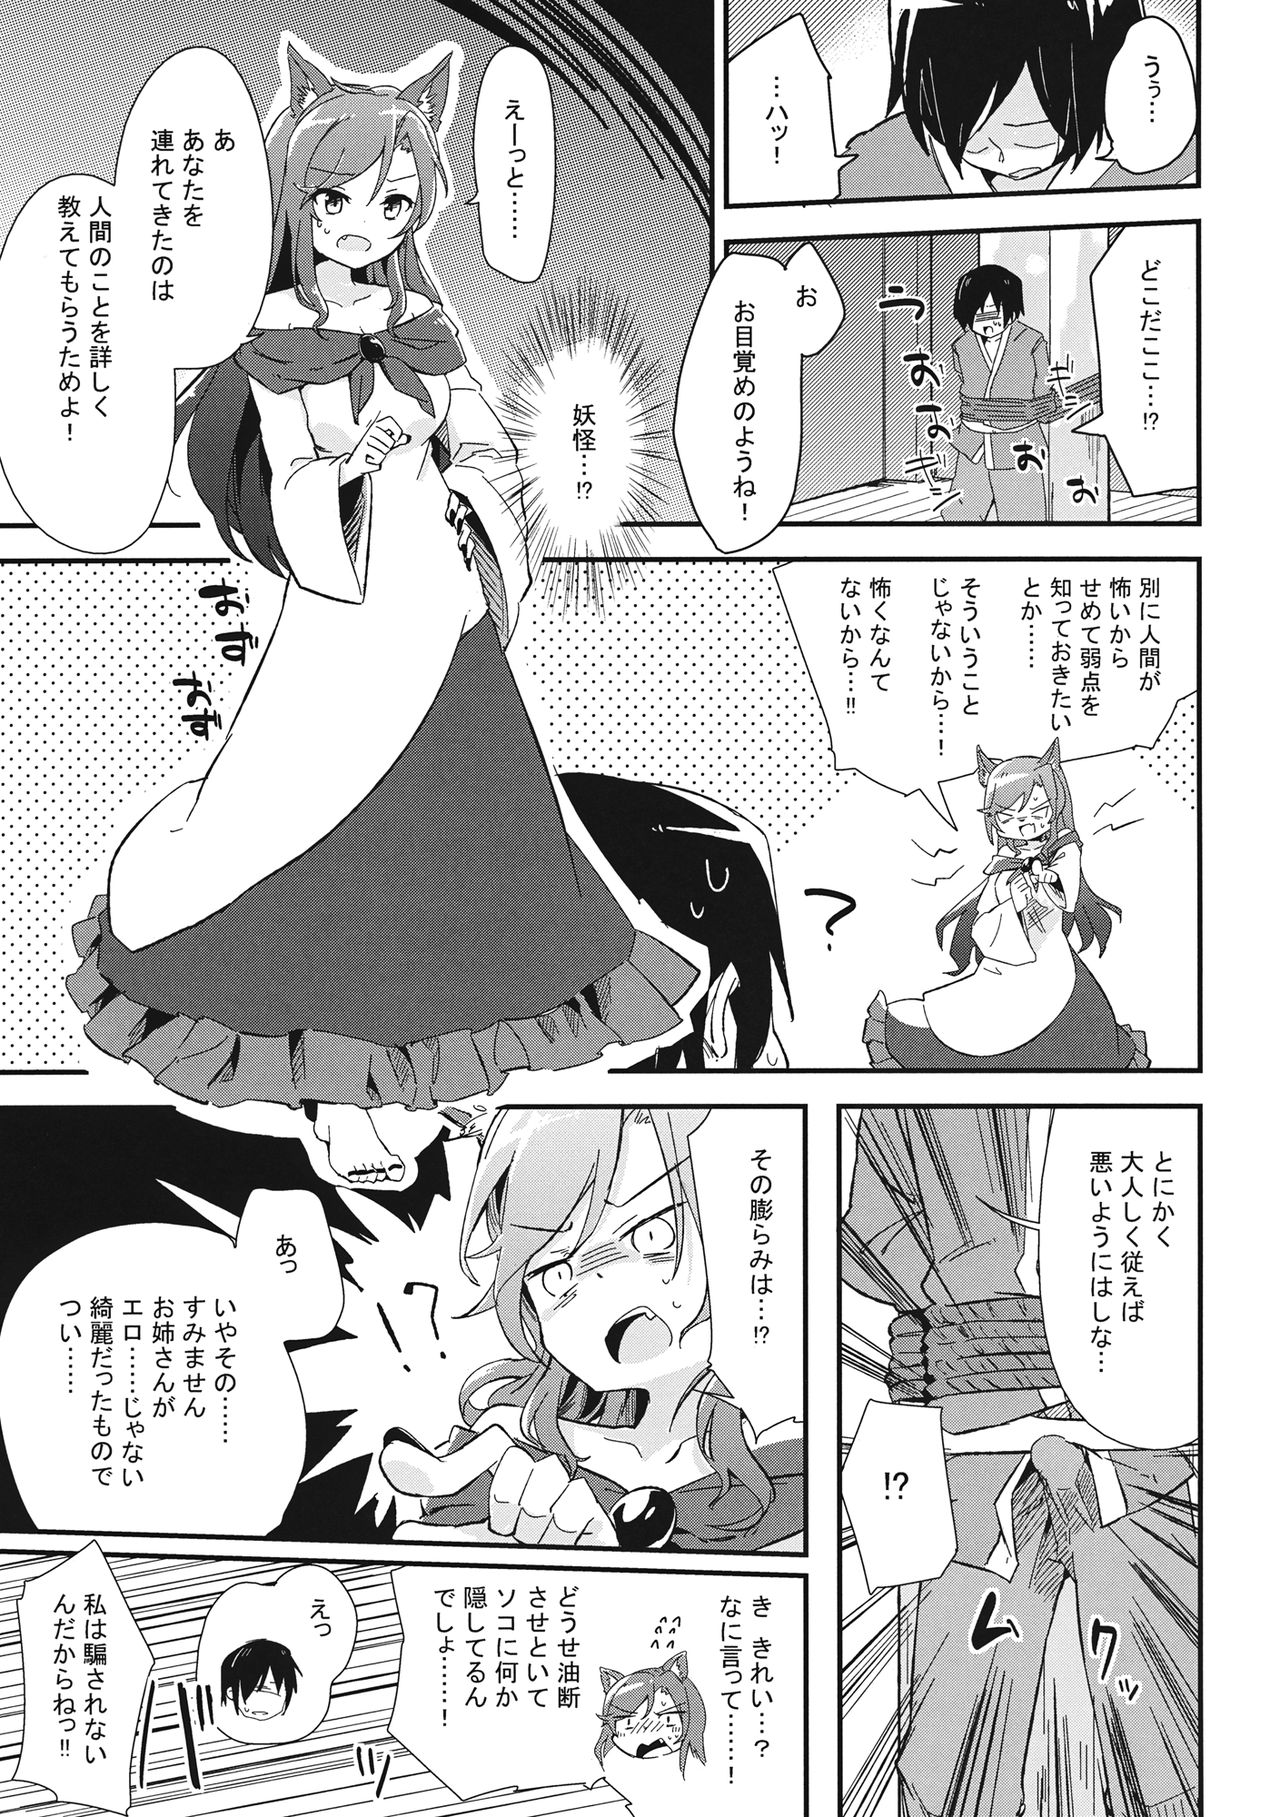 (Reitaisai 12) [border rim (Various)] Touhou Muchi Shichu Goudou - Toho joint magazine sex in the ignorant situations  (Touhou Project) (例大祭12) [border rim (よろず)] 東方むちシチュ合同 (東方Project)